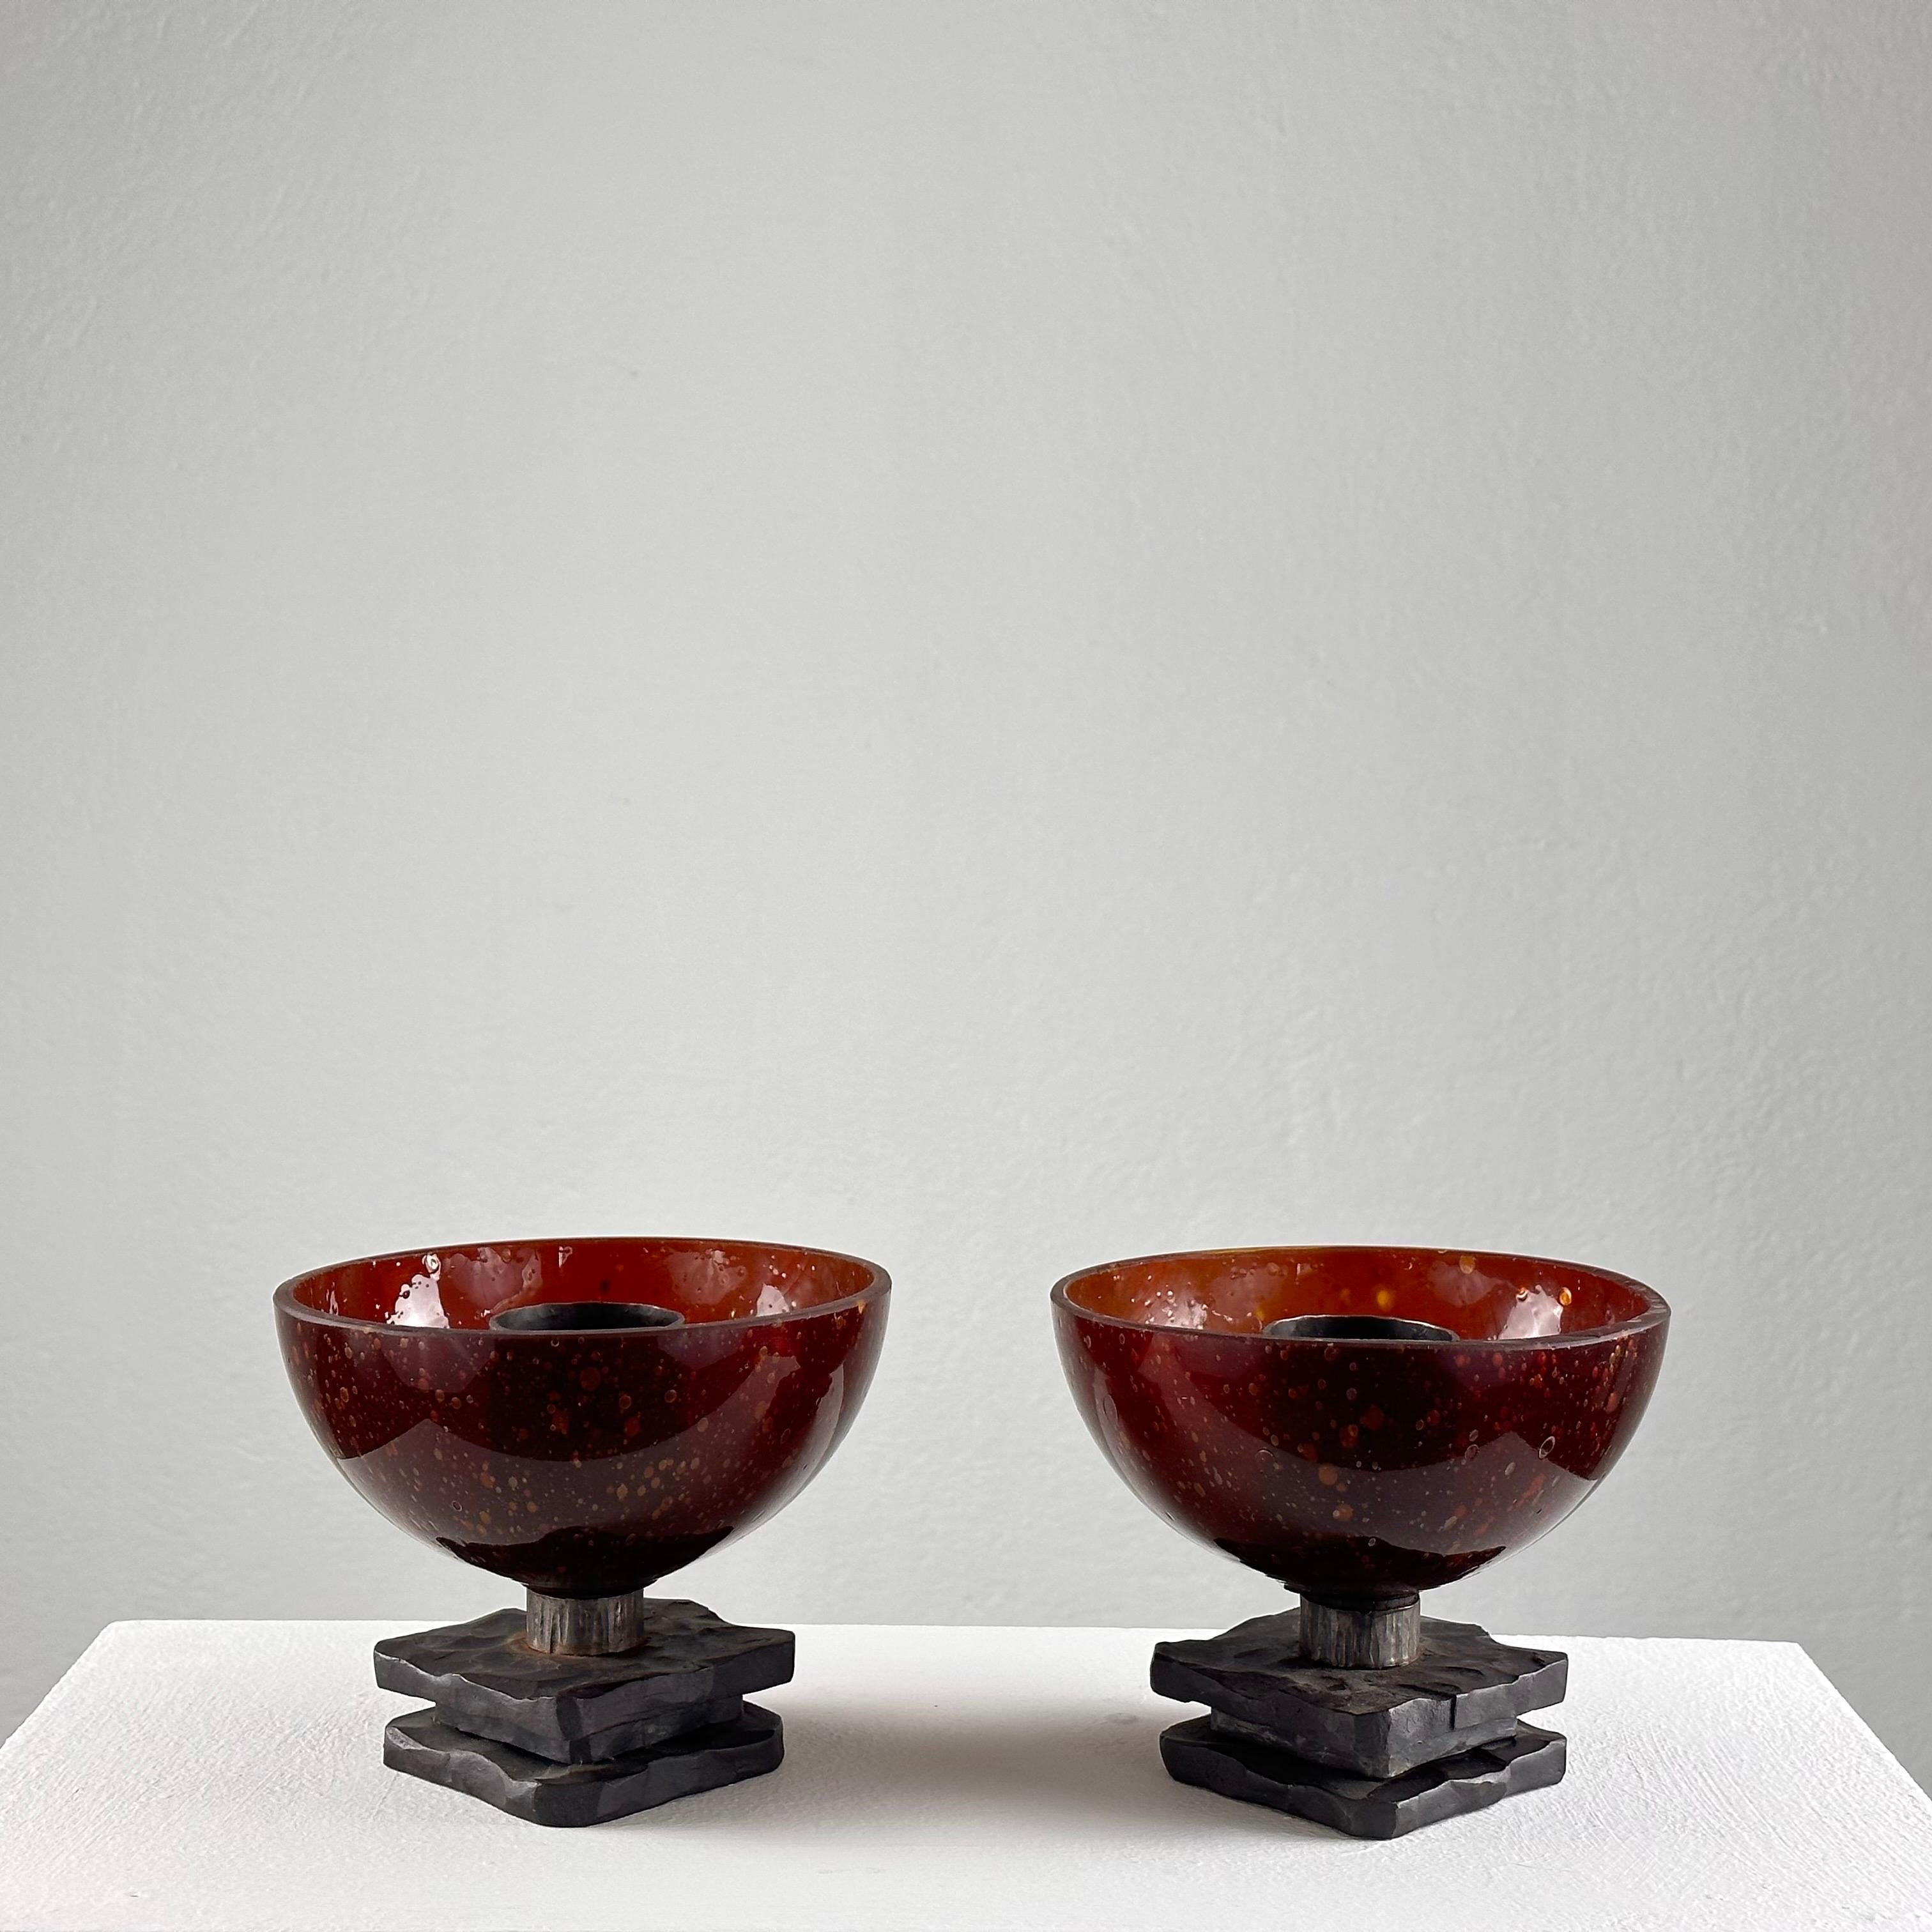 Illuminate your space with a touch of mid-century elegance and artisanal flair with this pair of splendid Brutalist candle holder cups crafted from Murano glass. Dating back to the 1960s, these candle holders are a testament to the mastery of